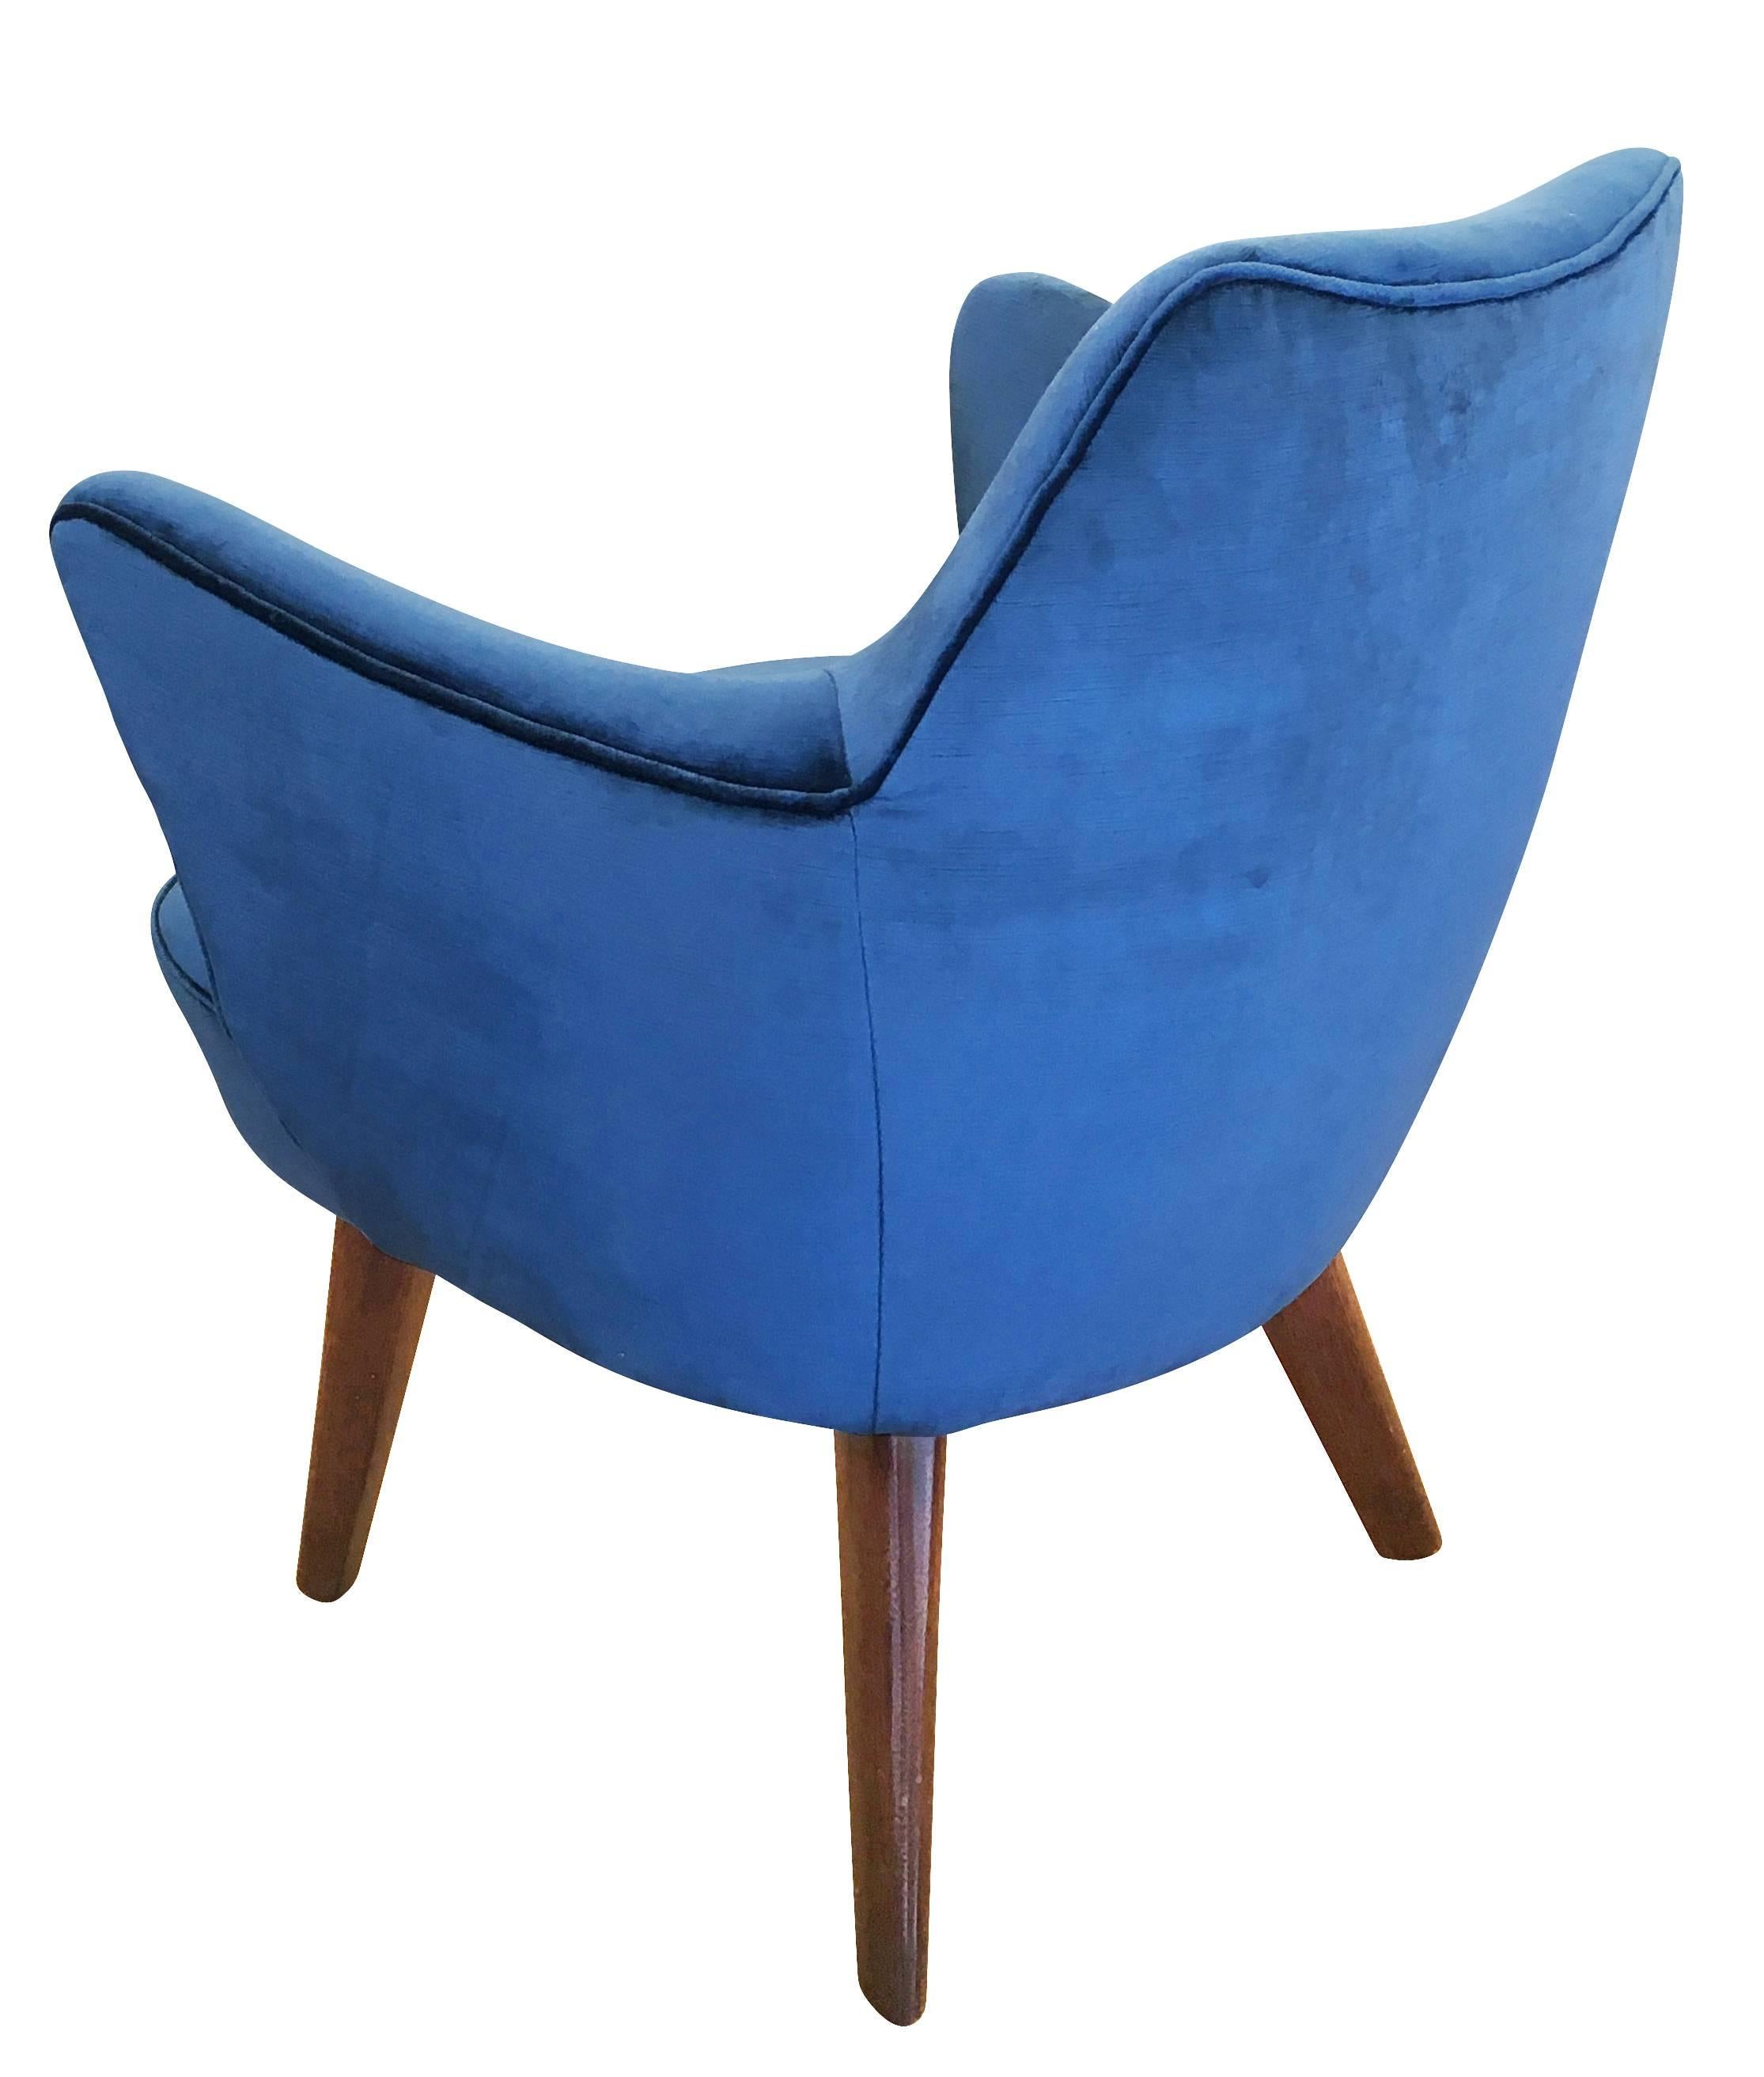 Wood Gio Ponti for Cassina Armchair with Expertise from the Archives